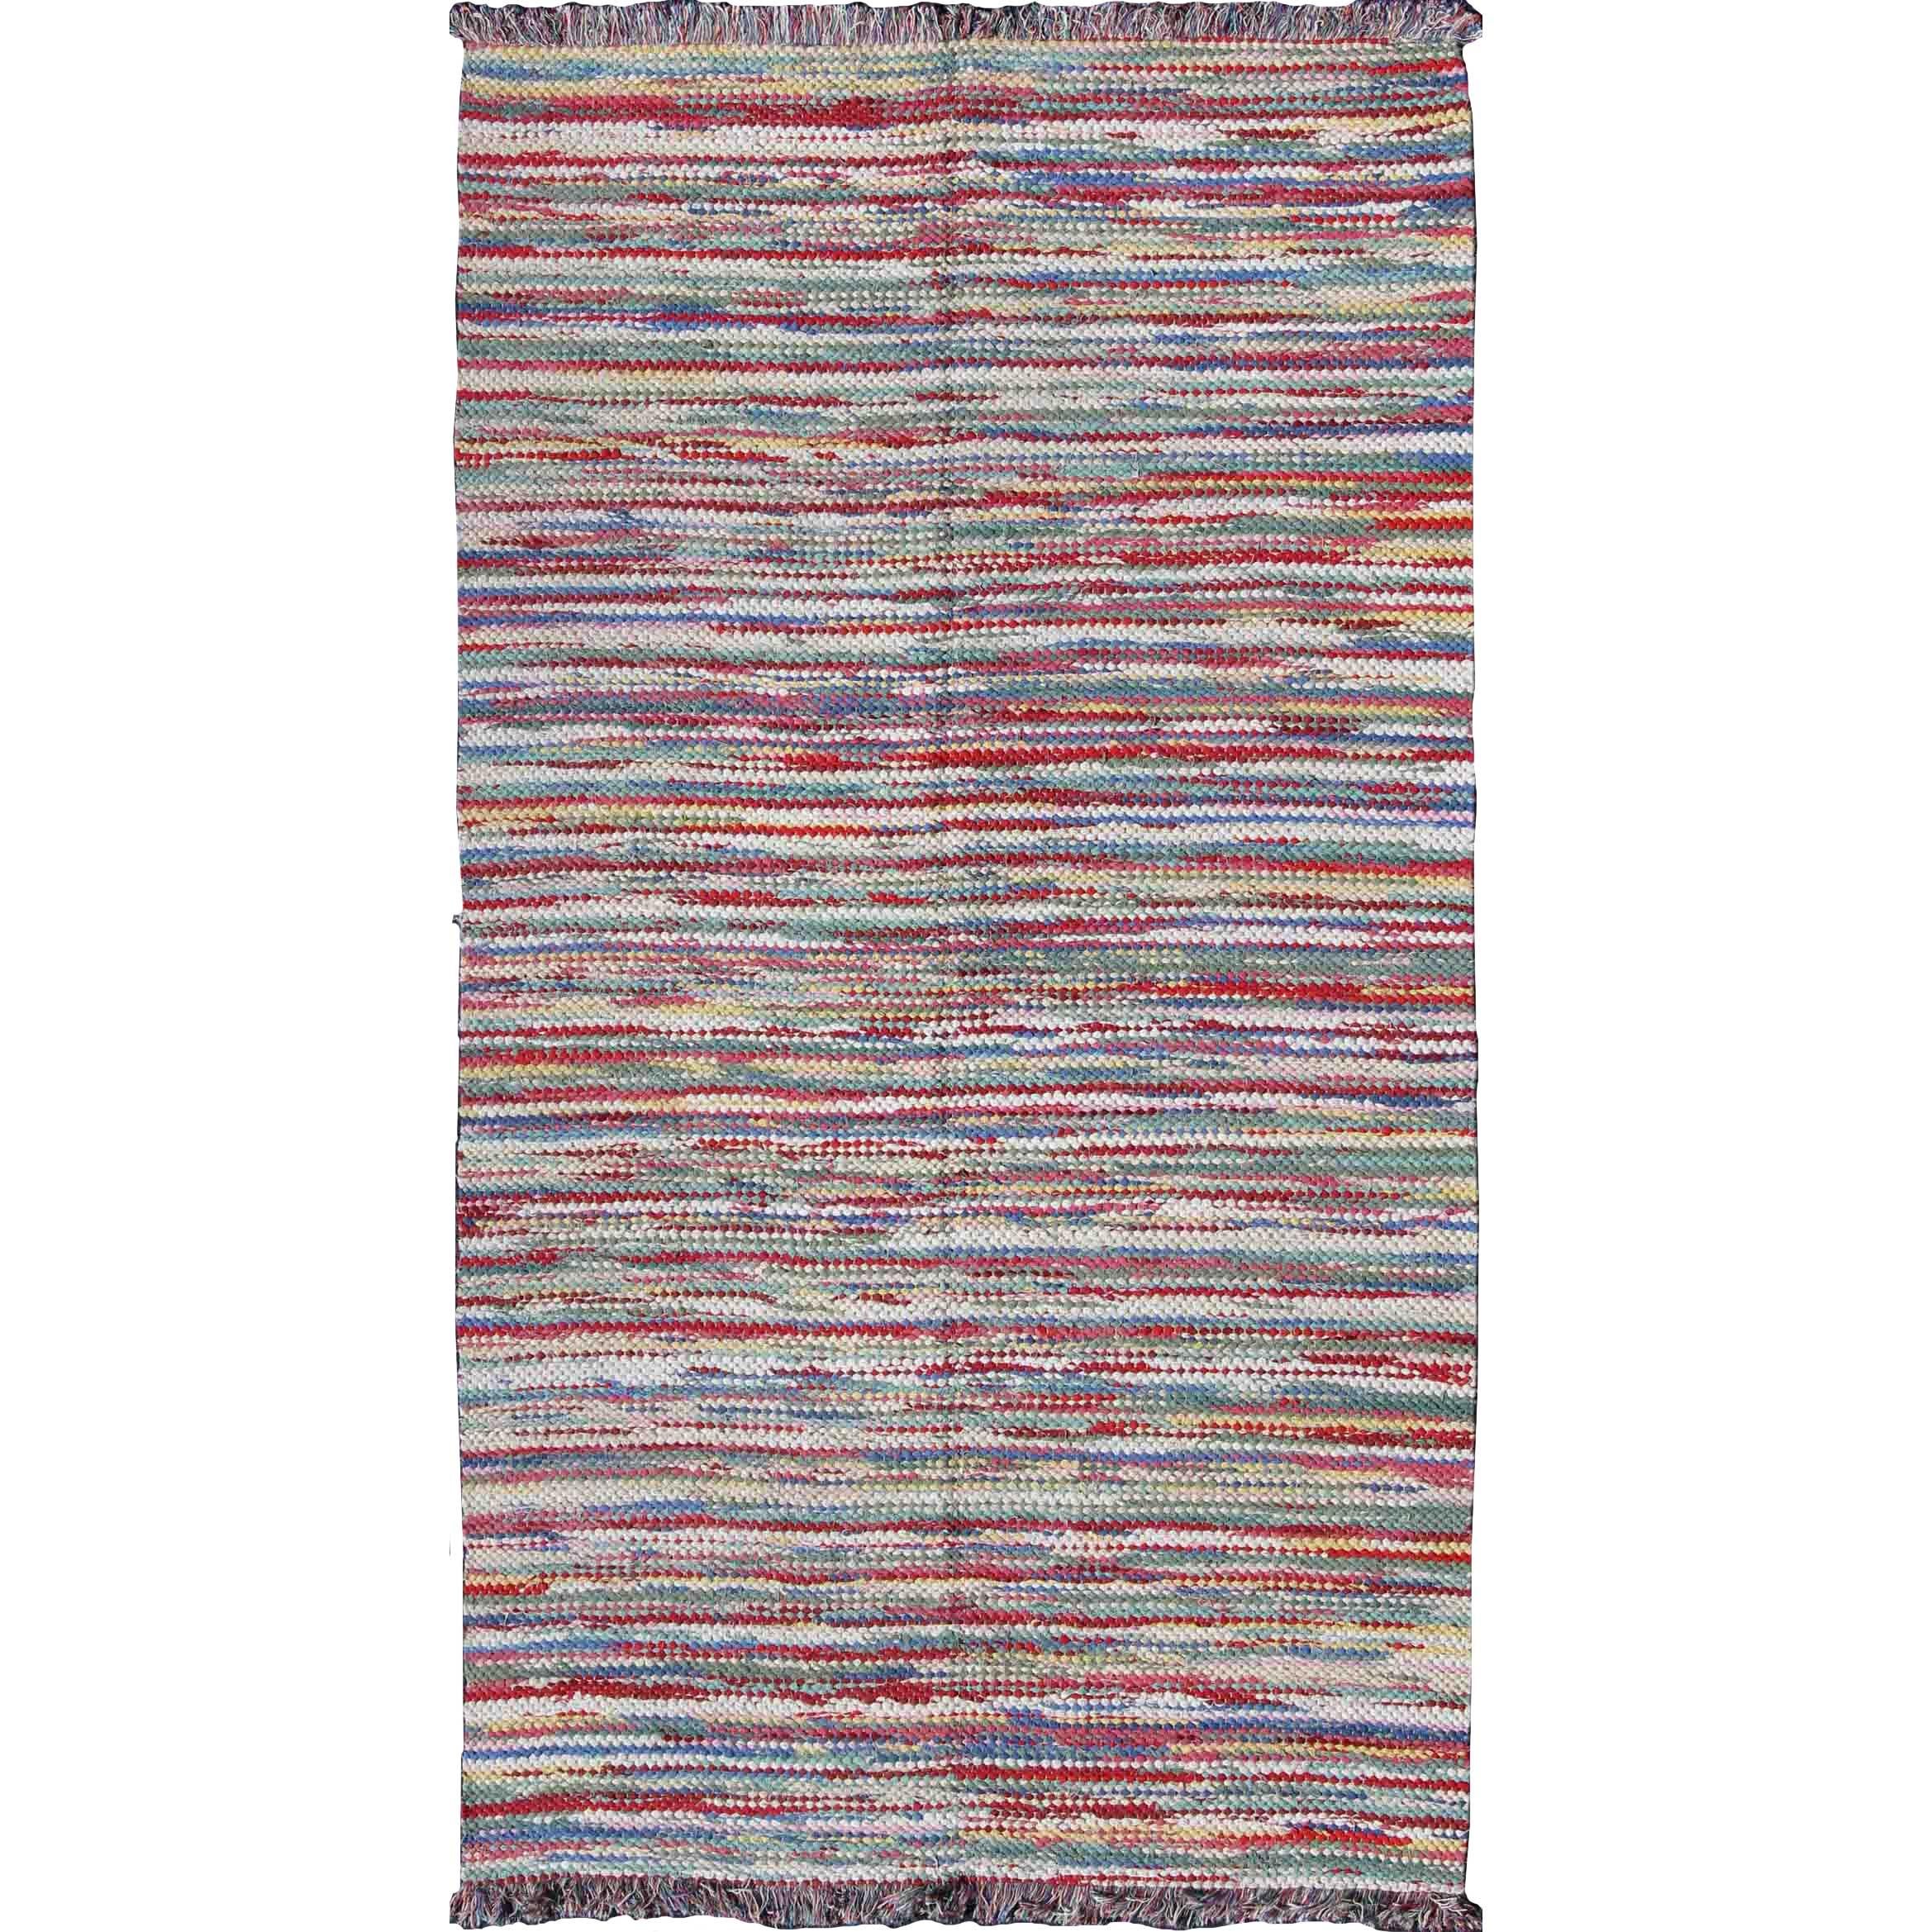 Large Colorful American Braided Rug with Horizontal Stripes and Fringe Detail